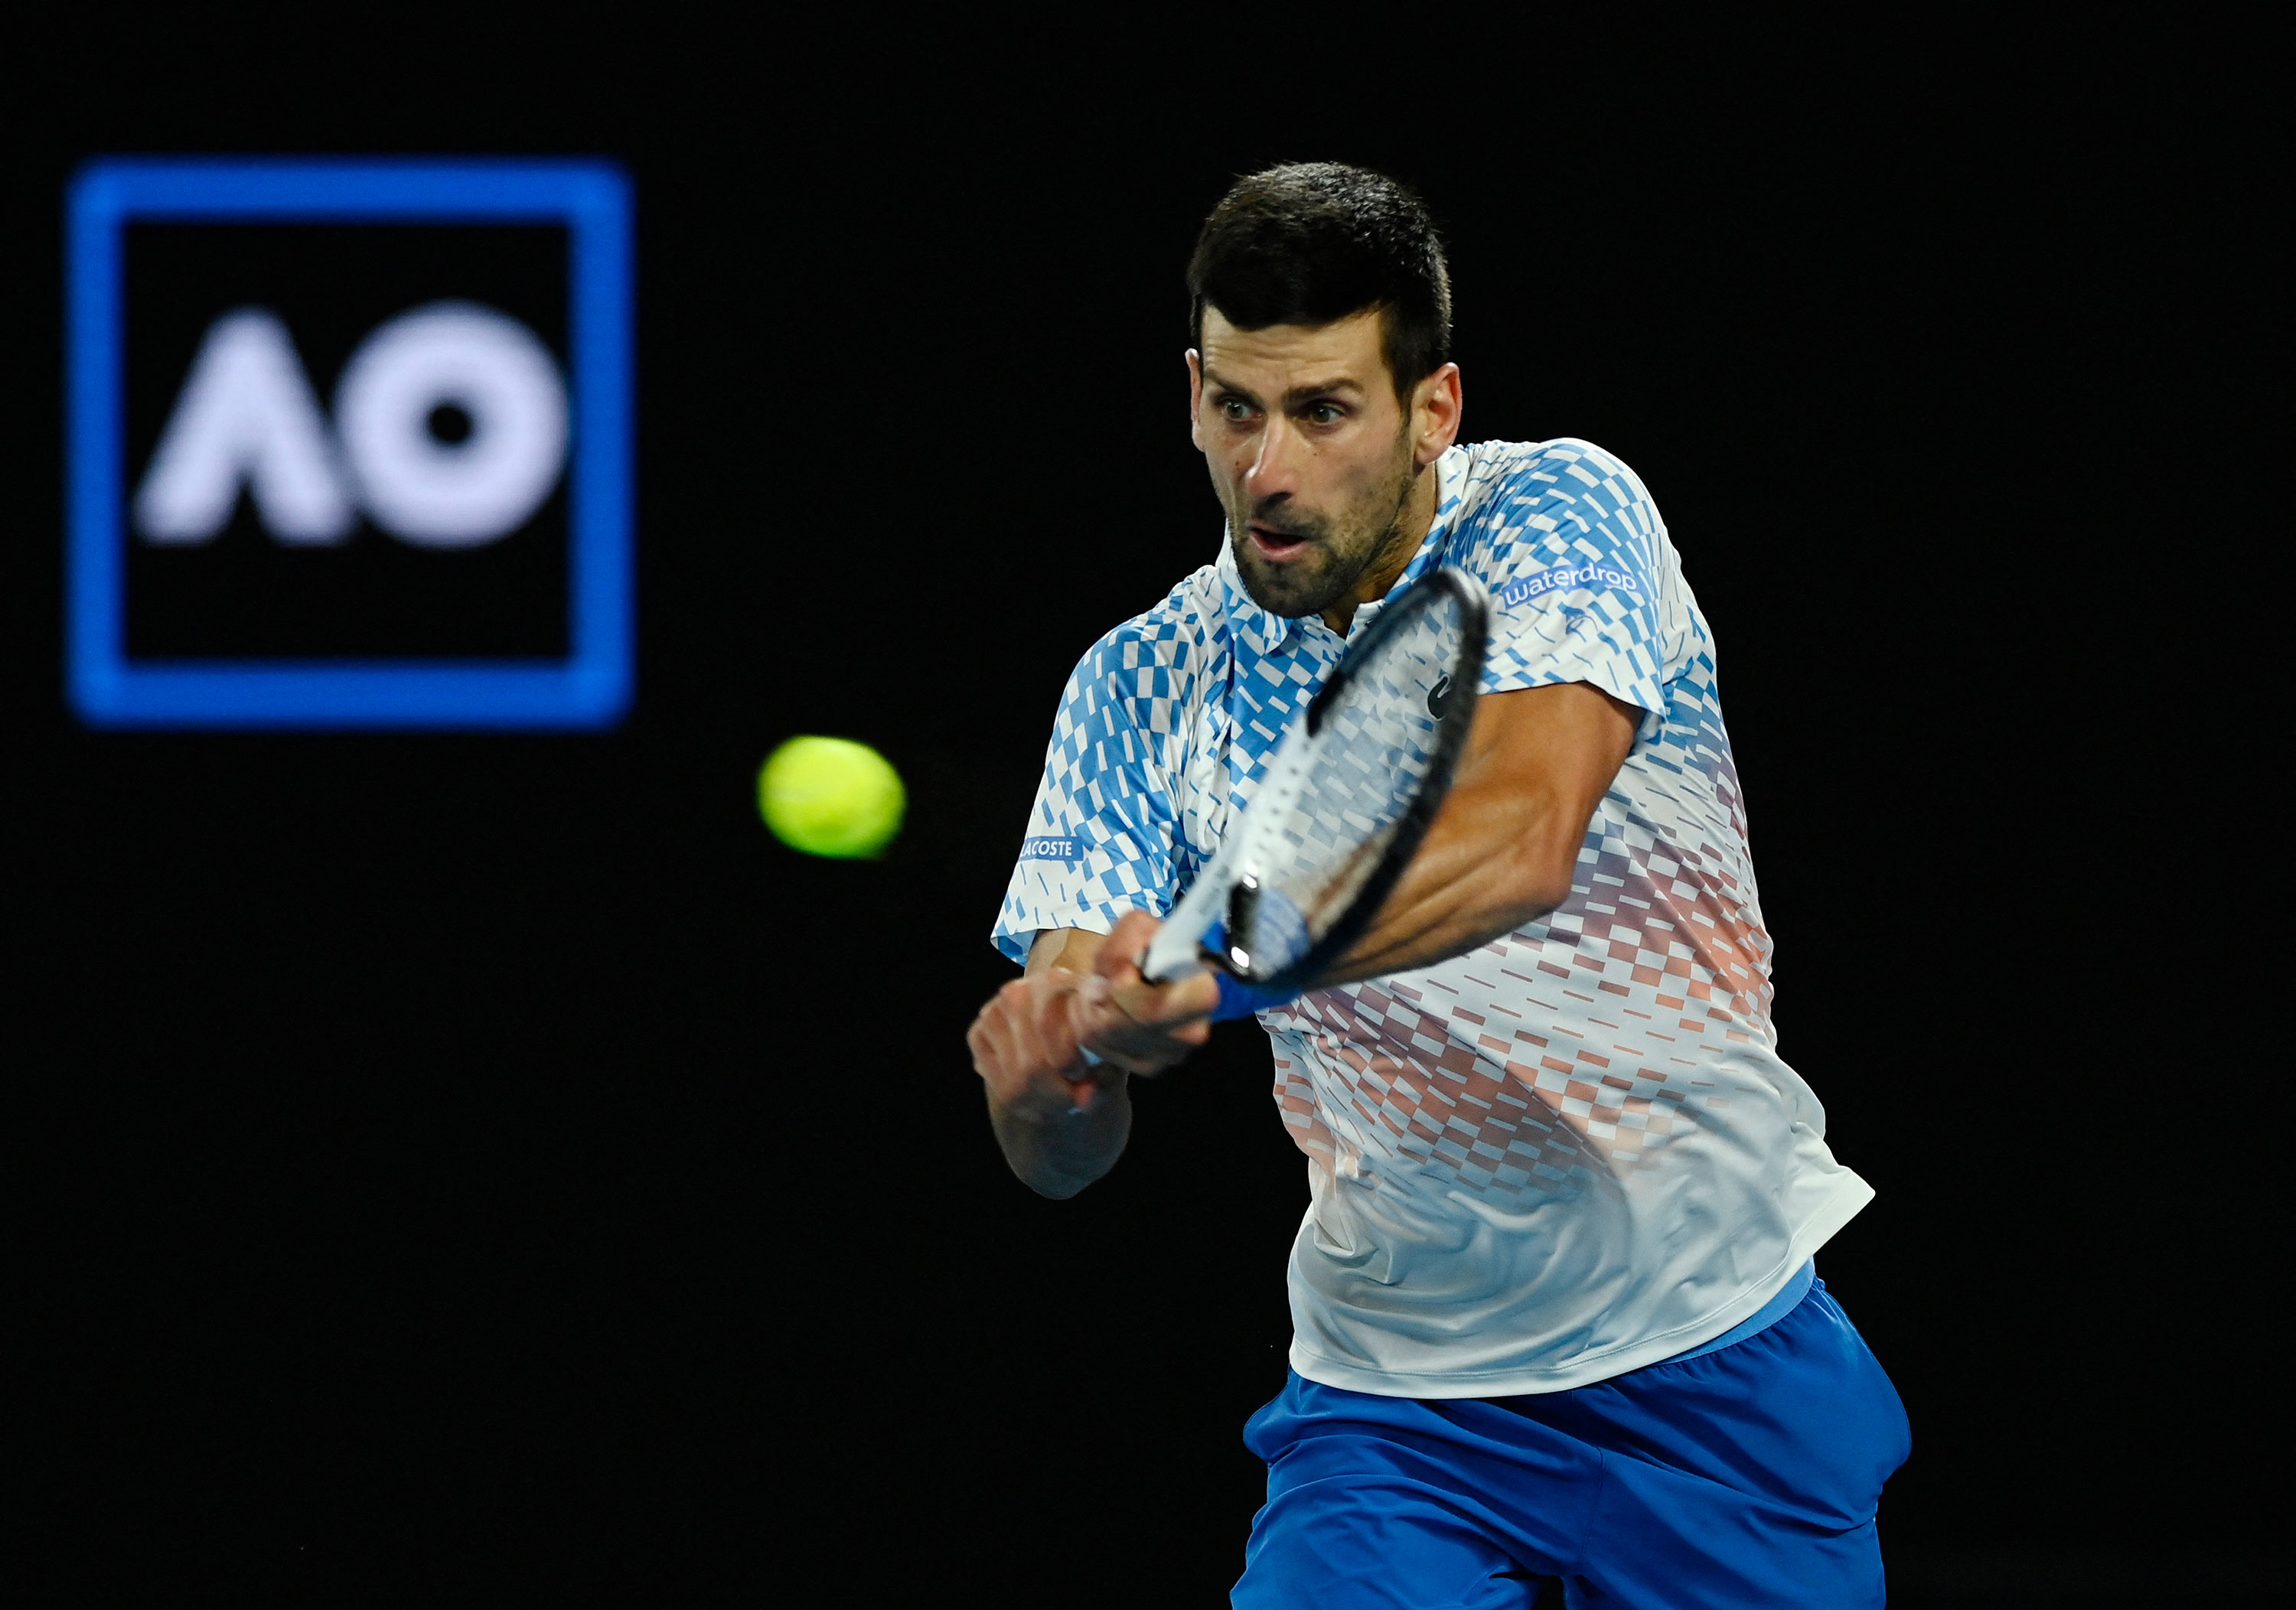 Serbia’s Novak Djokovic in action during his quarterfinal match against Russia’s Andrey Rublev on Wednesday, January 25 in Melbourne.